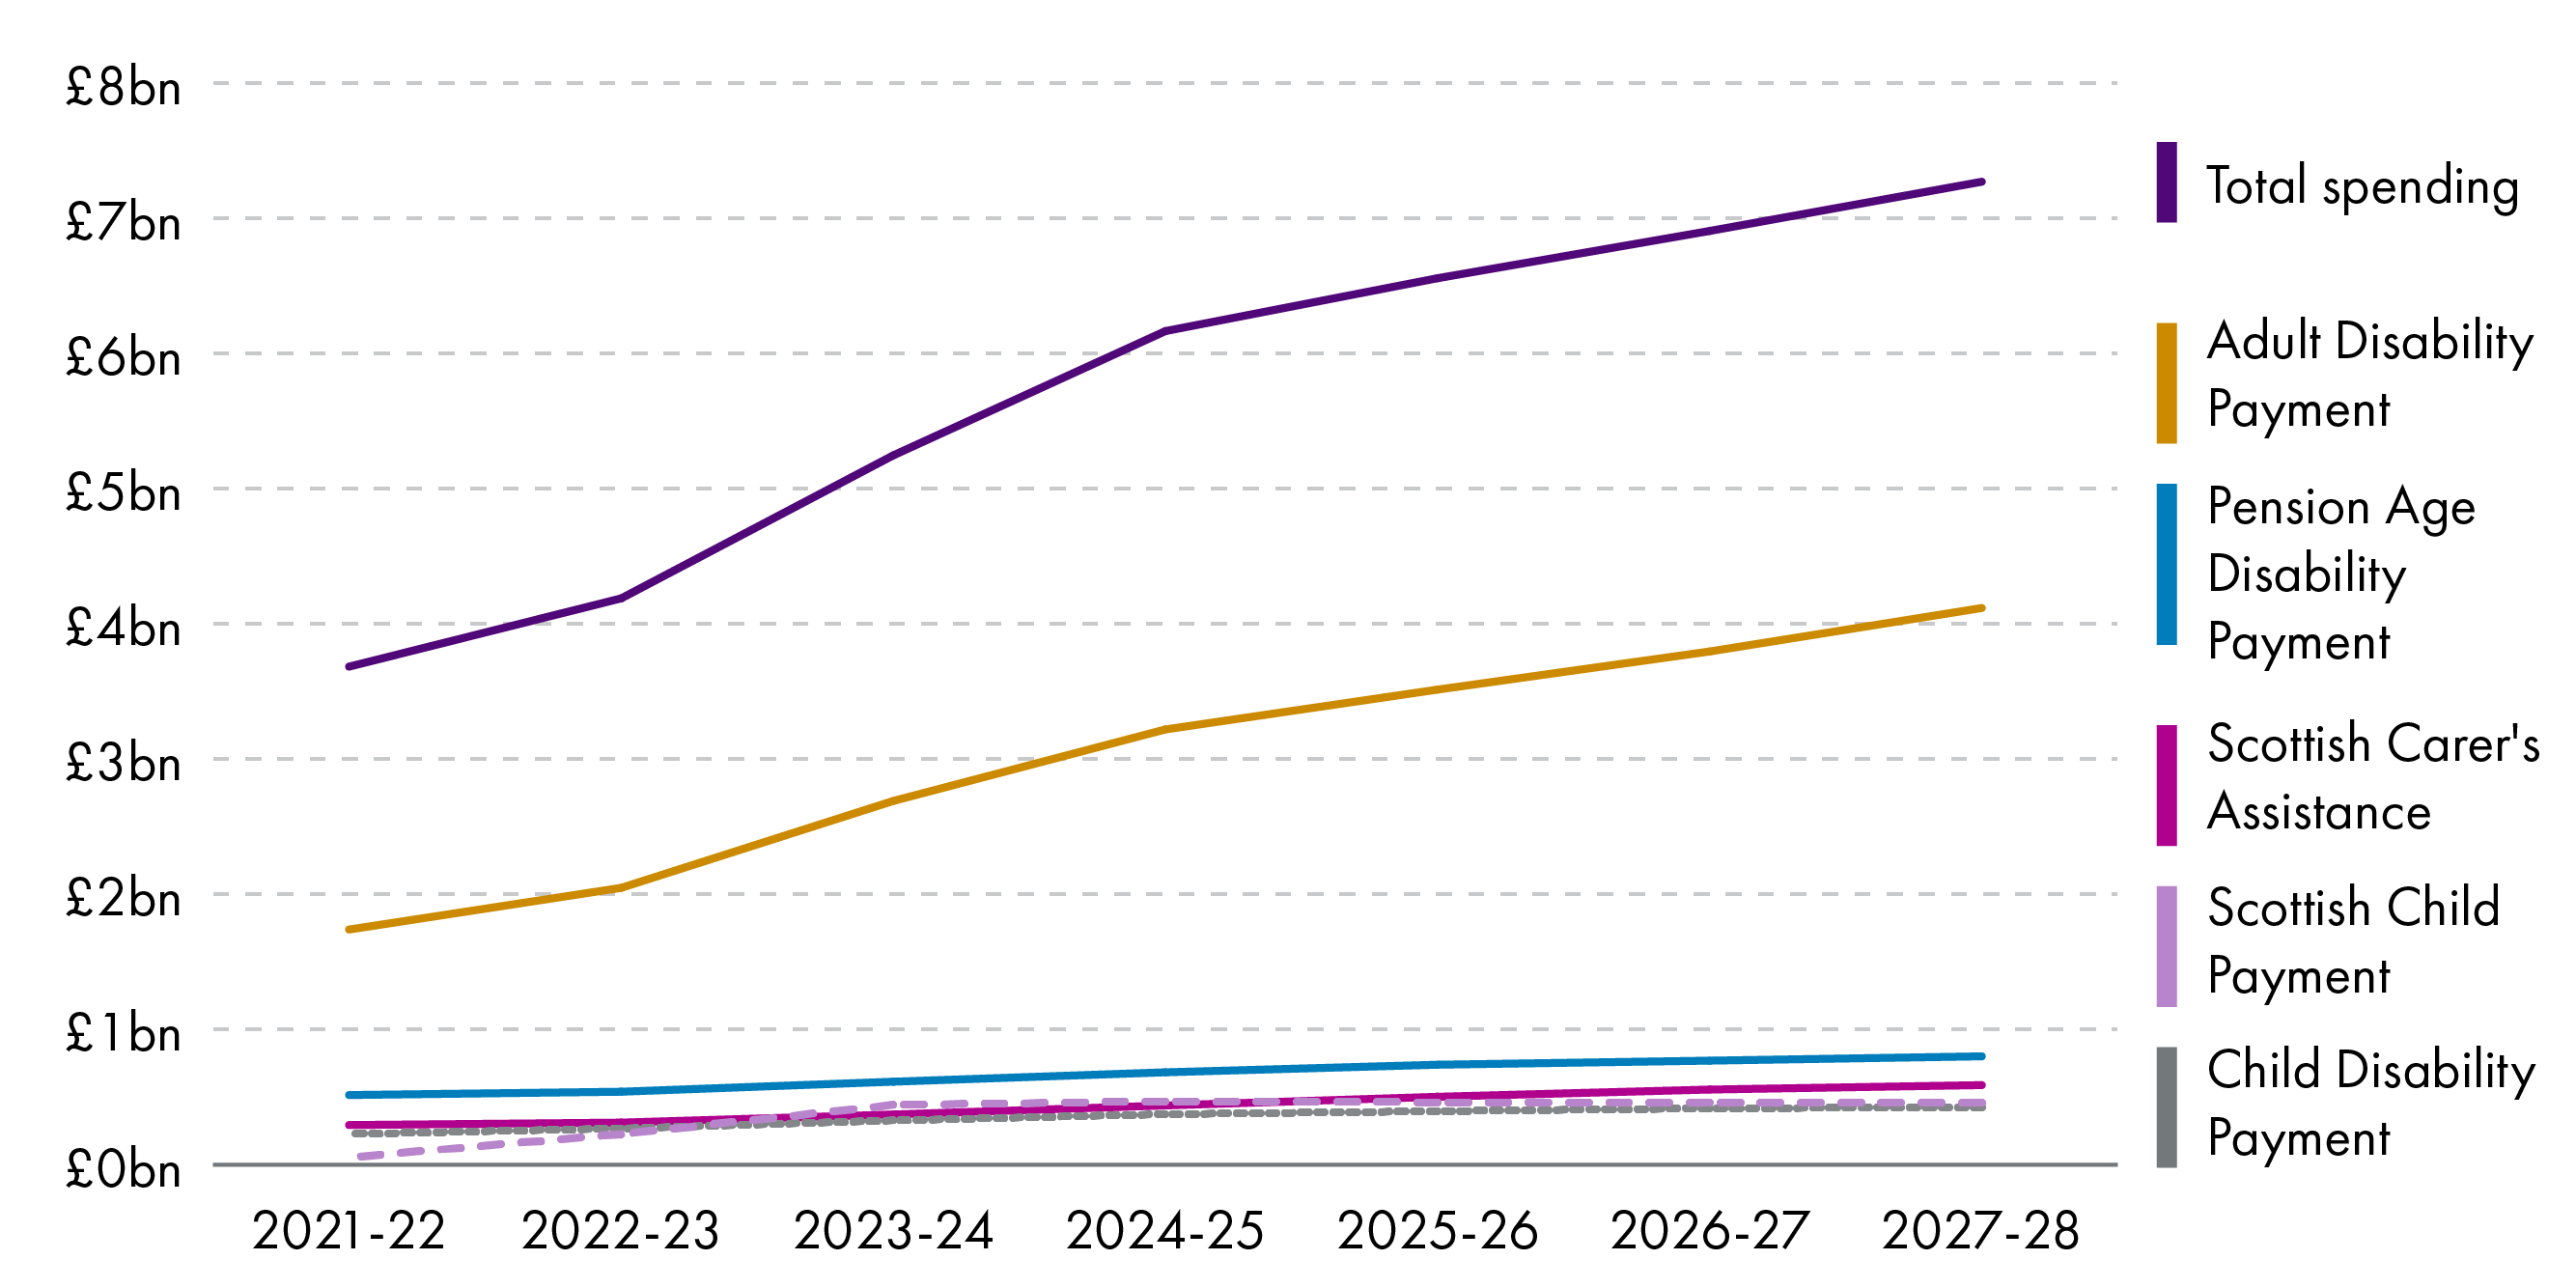 A line graph a purple line showing total spending, a brown line showing Adult Disability Payment, a teal line showing Pension Age Disability Payment, a maroon line showing Scottish Carer's Assistance, a violet line showing Scottish Child Payment and a grey line shoing Child Disability Payment in £billions from 2021-22 to 2027-28.